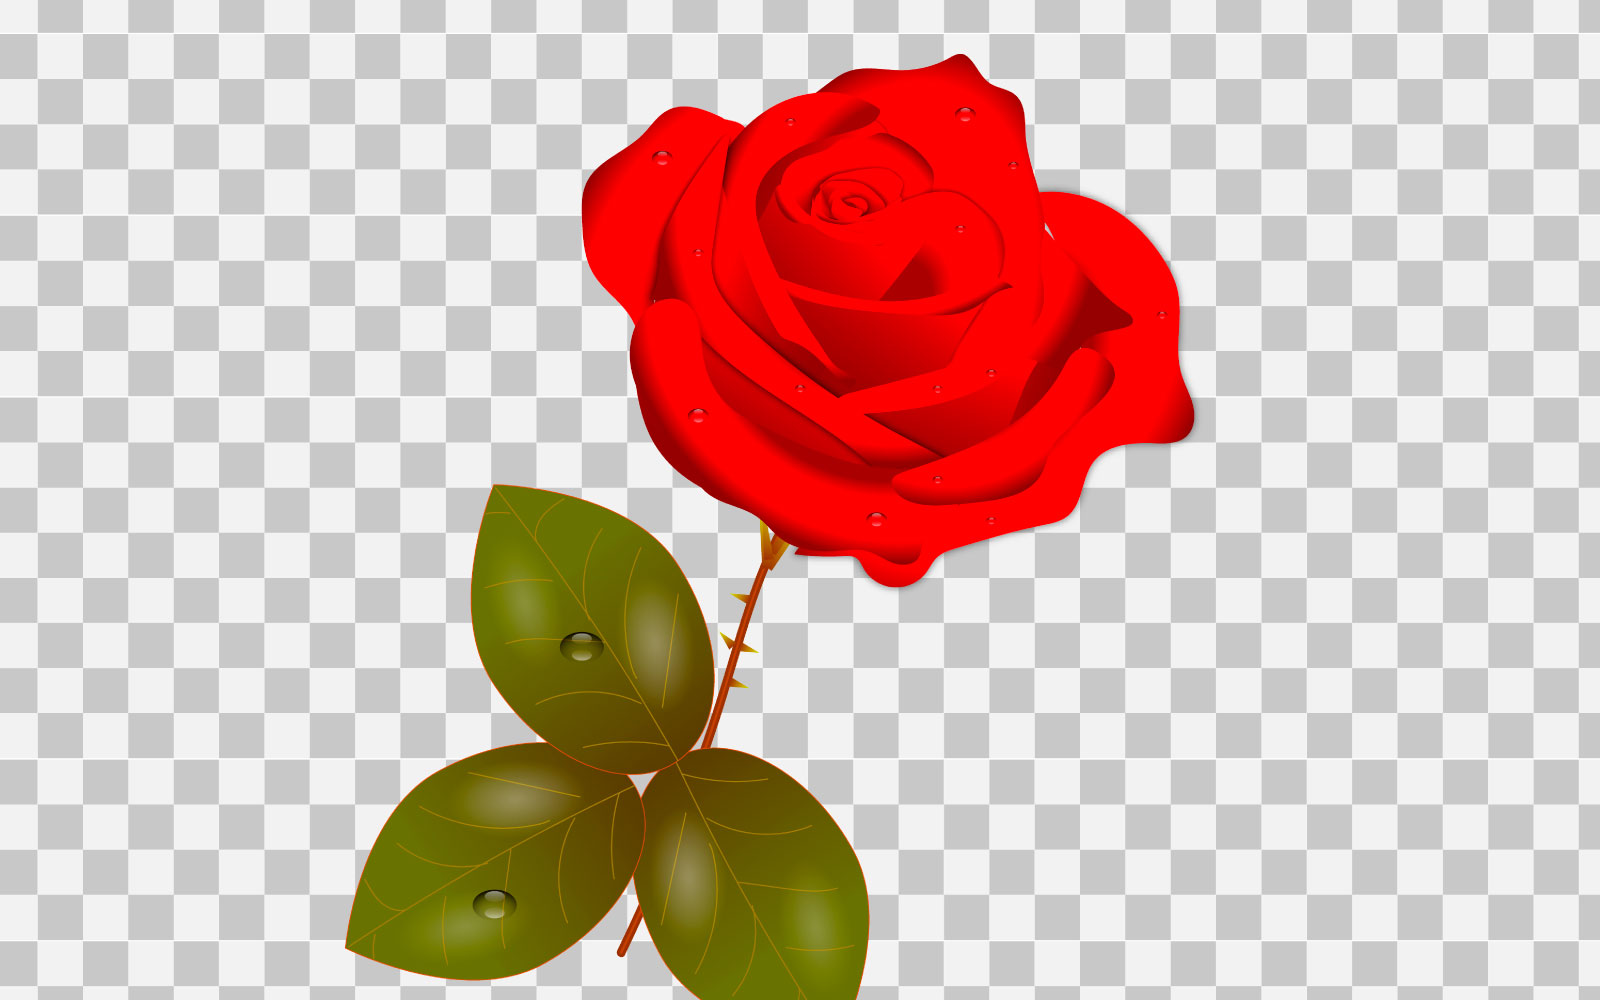 vector red rose realistic rose bouquet  with red flowers